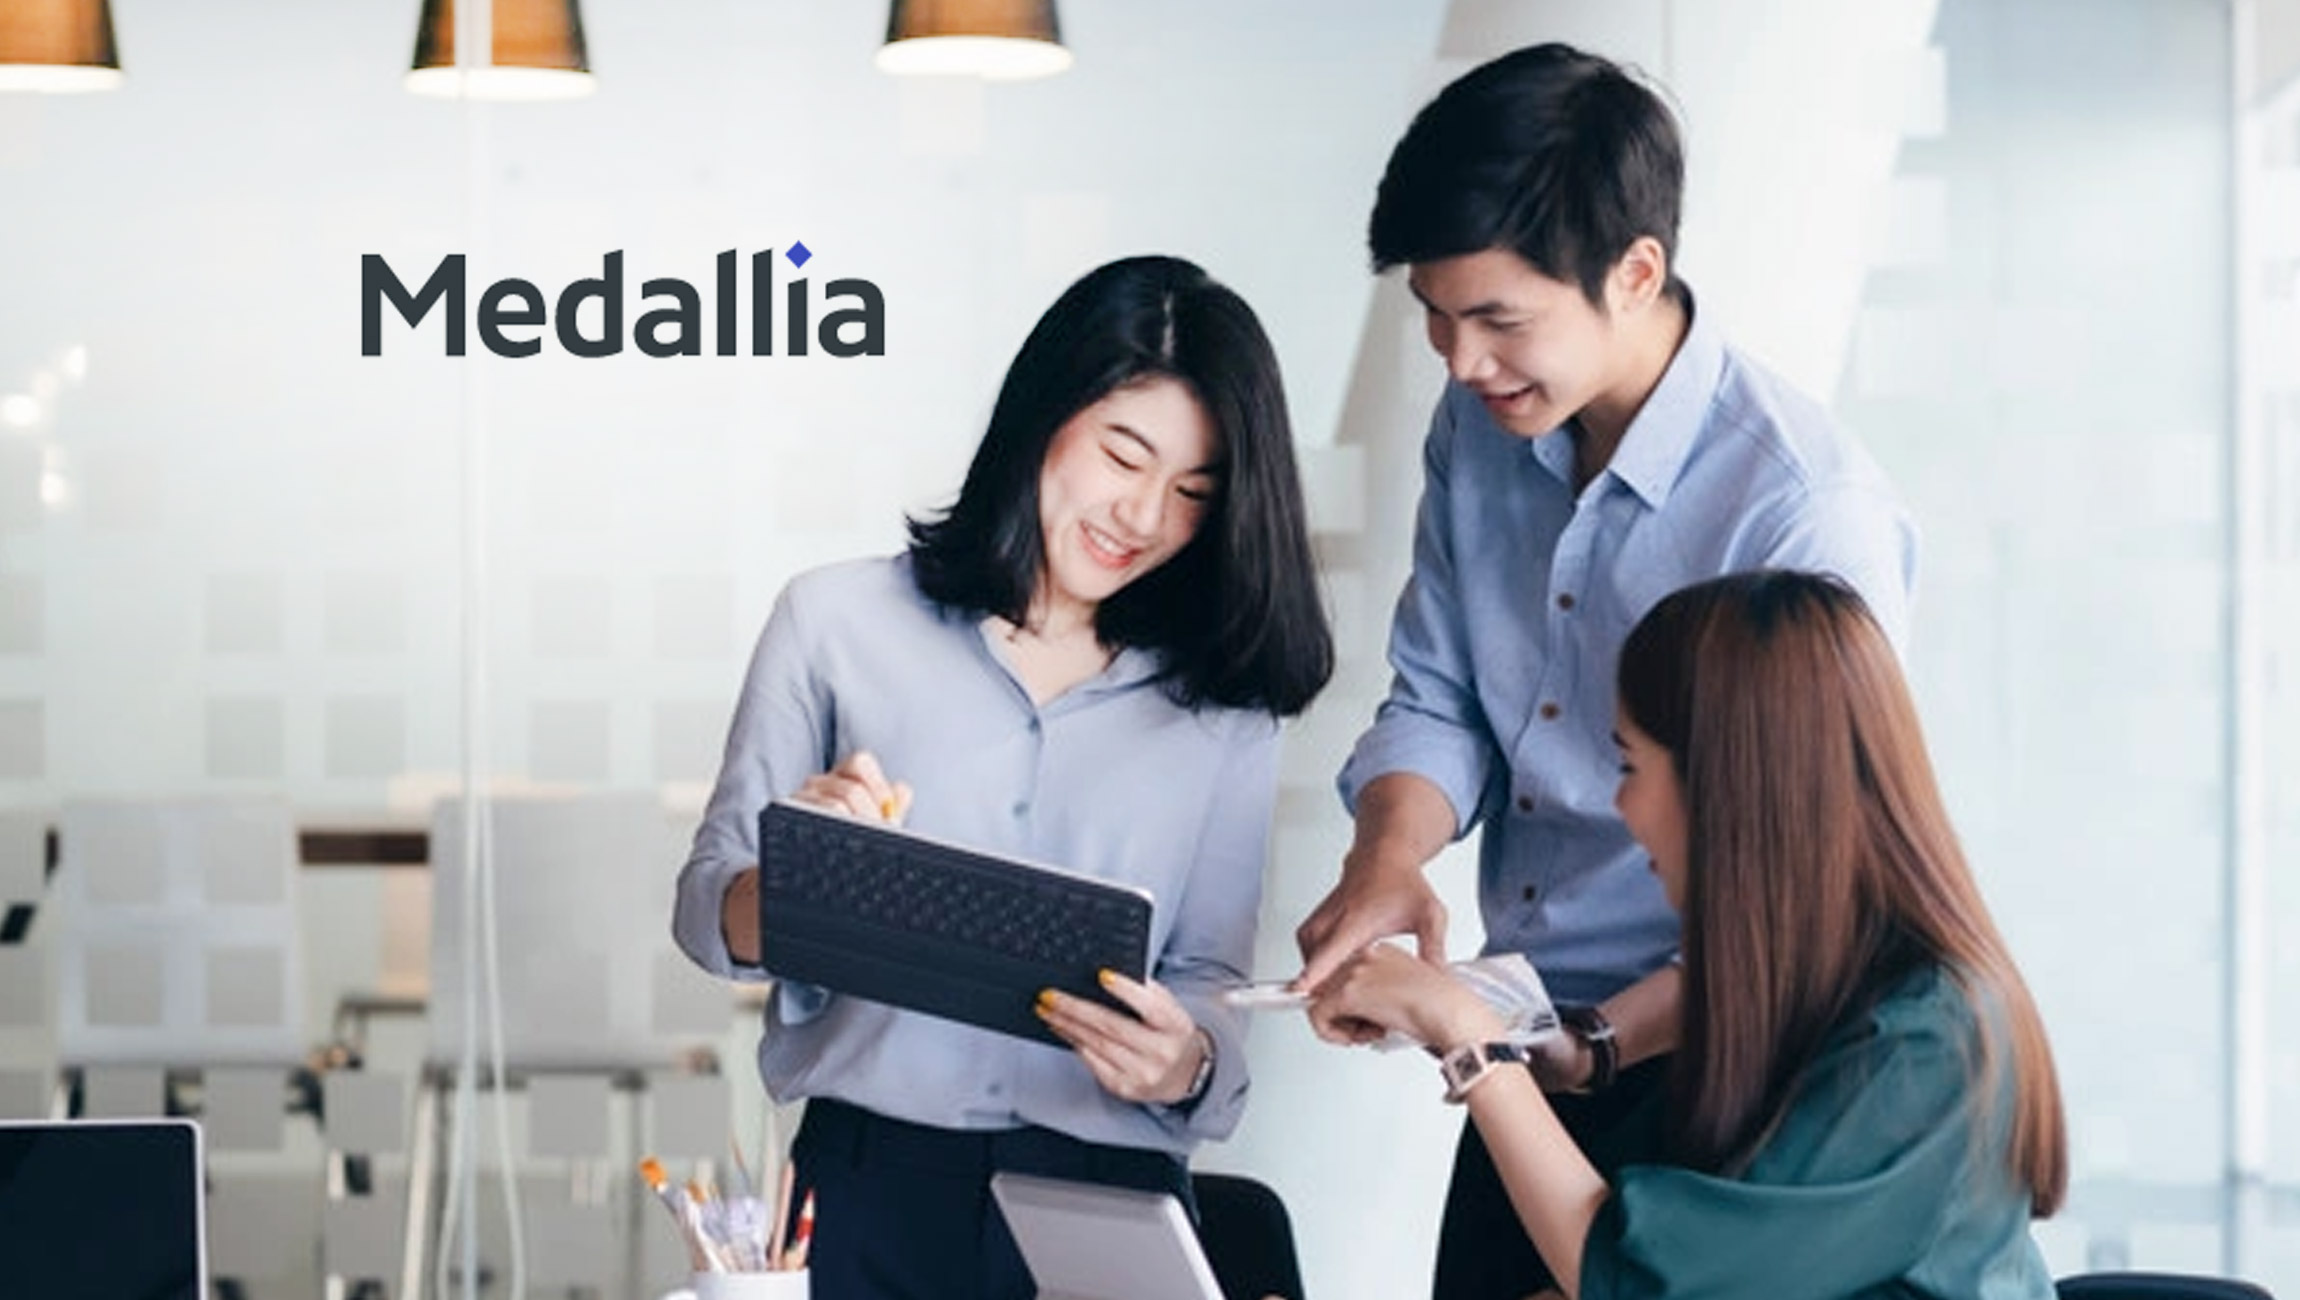 Medallia Honored as a Top 25 Work Tech Vendor by Inspiring Workplaces